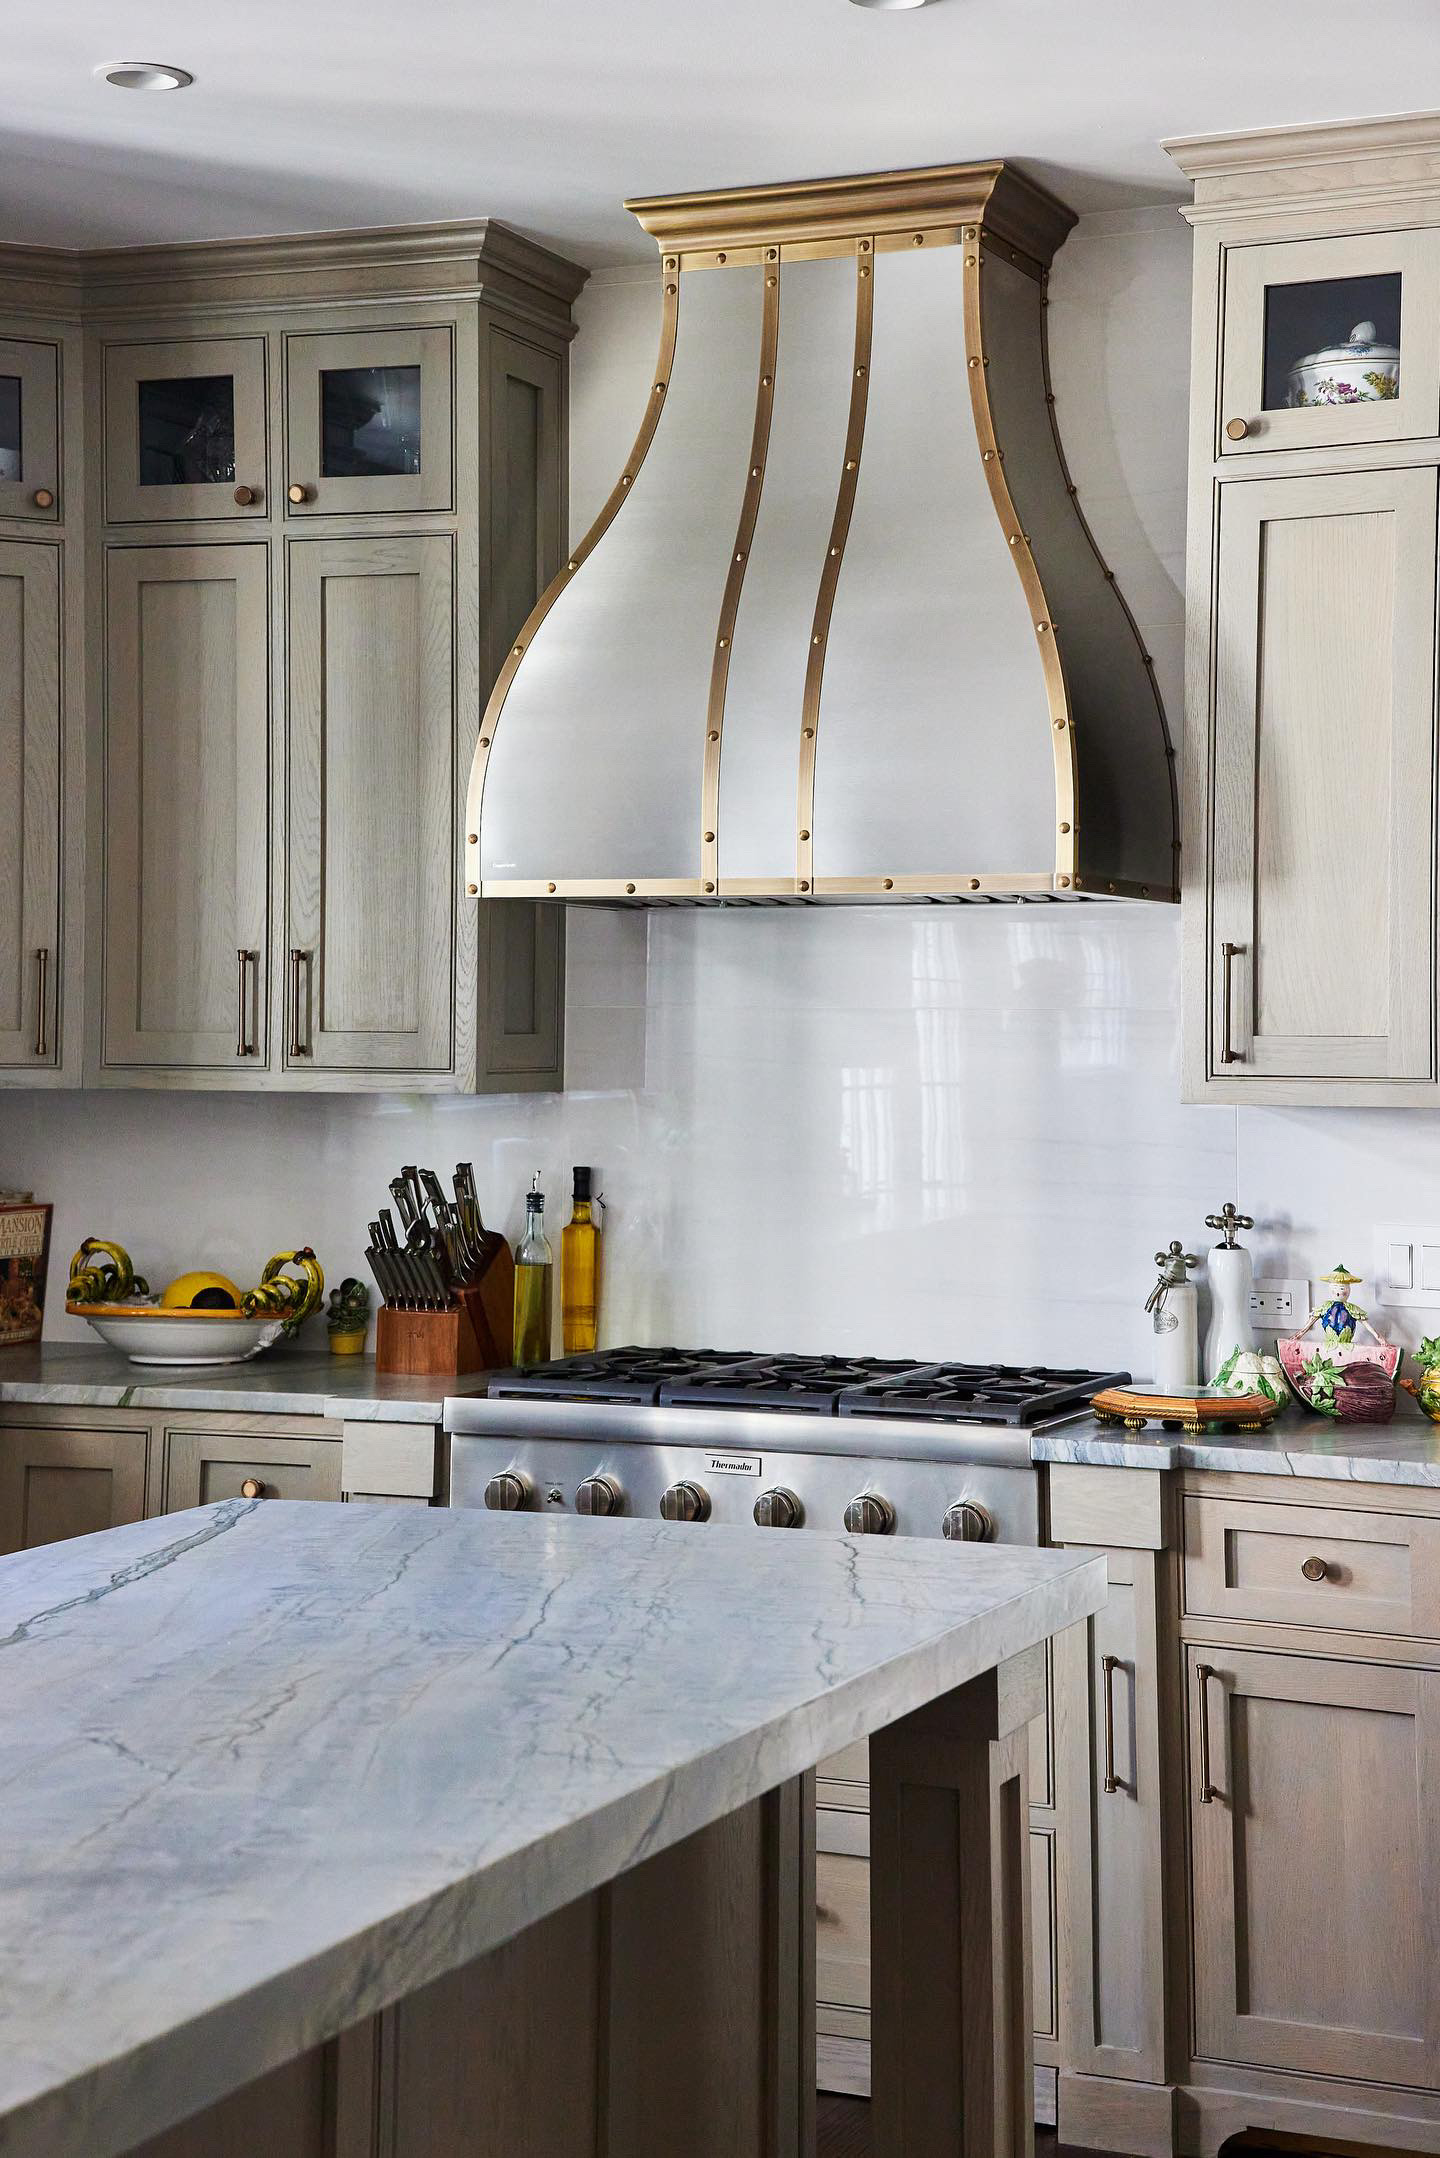 CopperSmith Artisan AT1 Wall Mount Brushed Stainless Steel Range Hood with Light Antique Brass Straps and Rivets in a french style kitchen with marble countertops wood cabinets and white tile backsplash